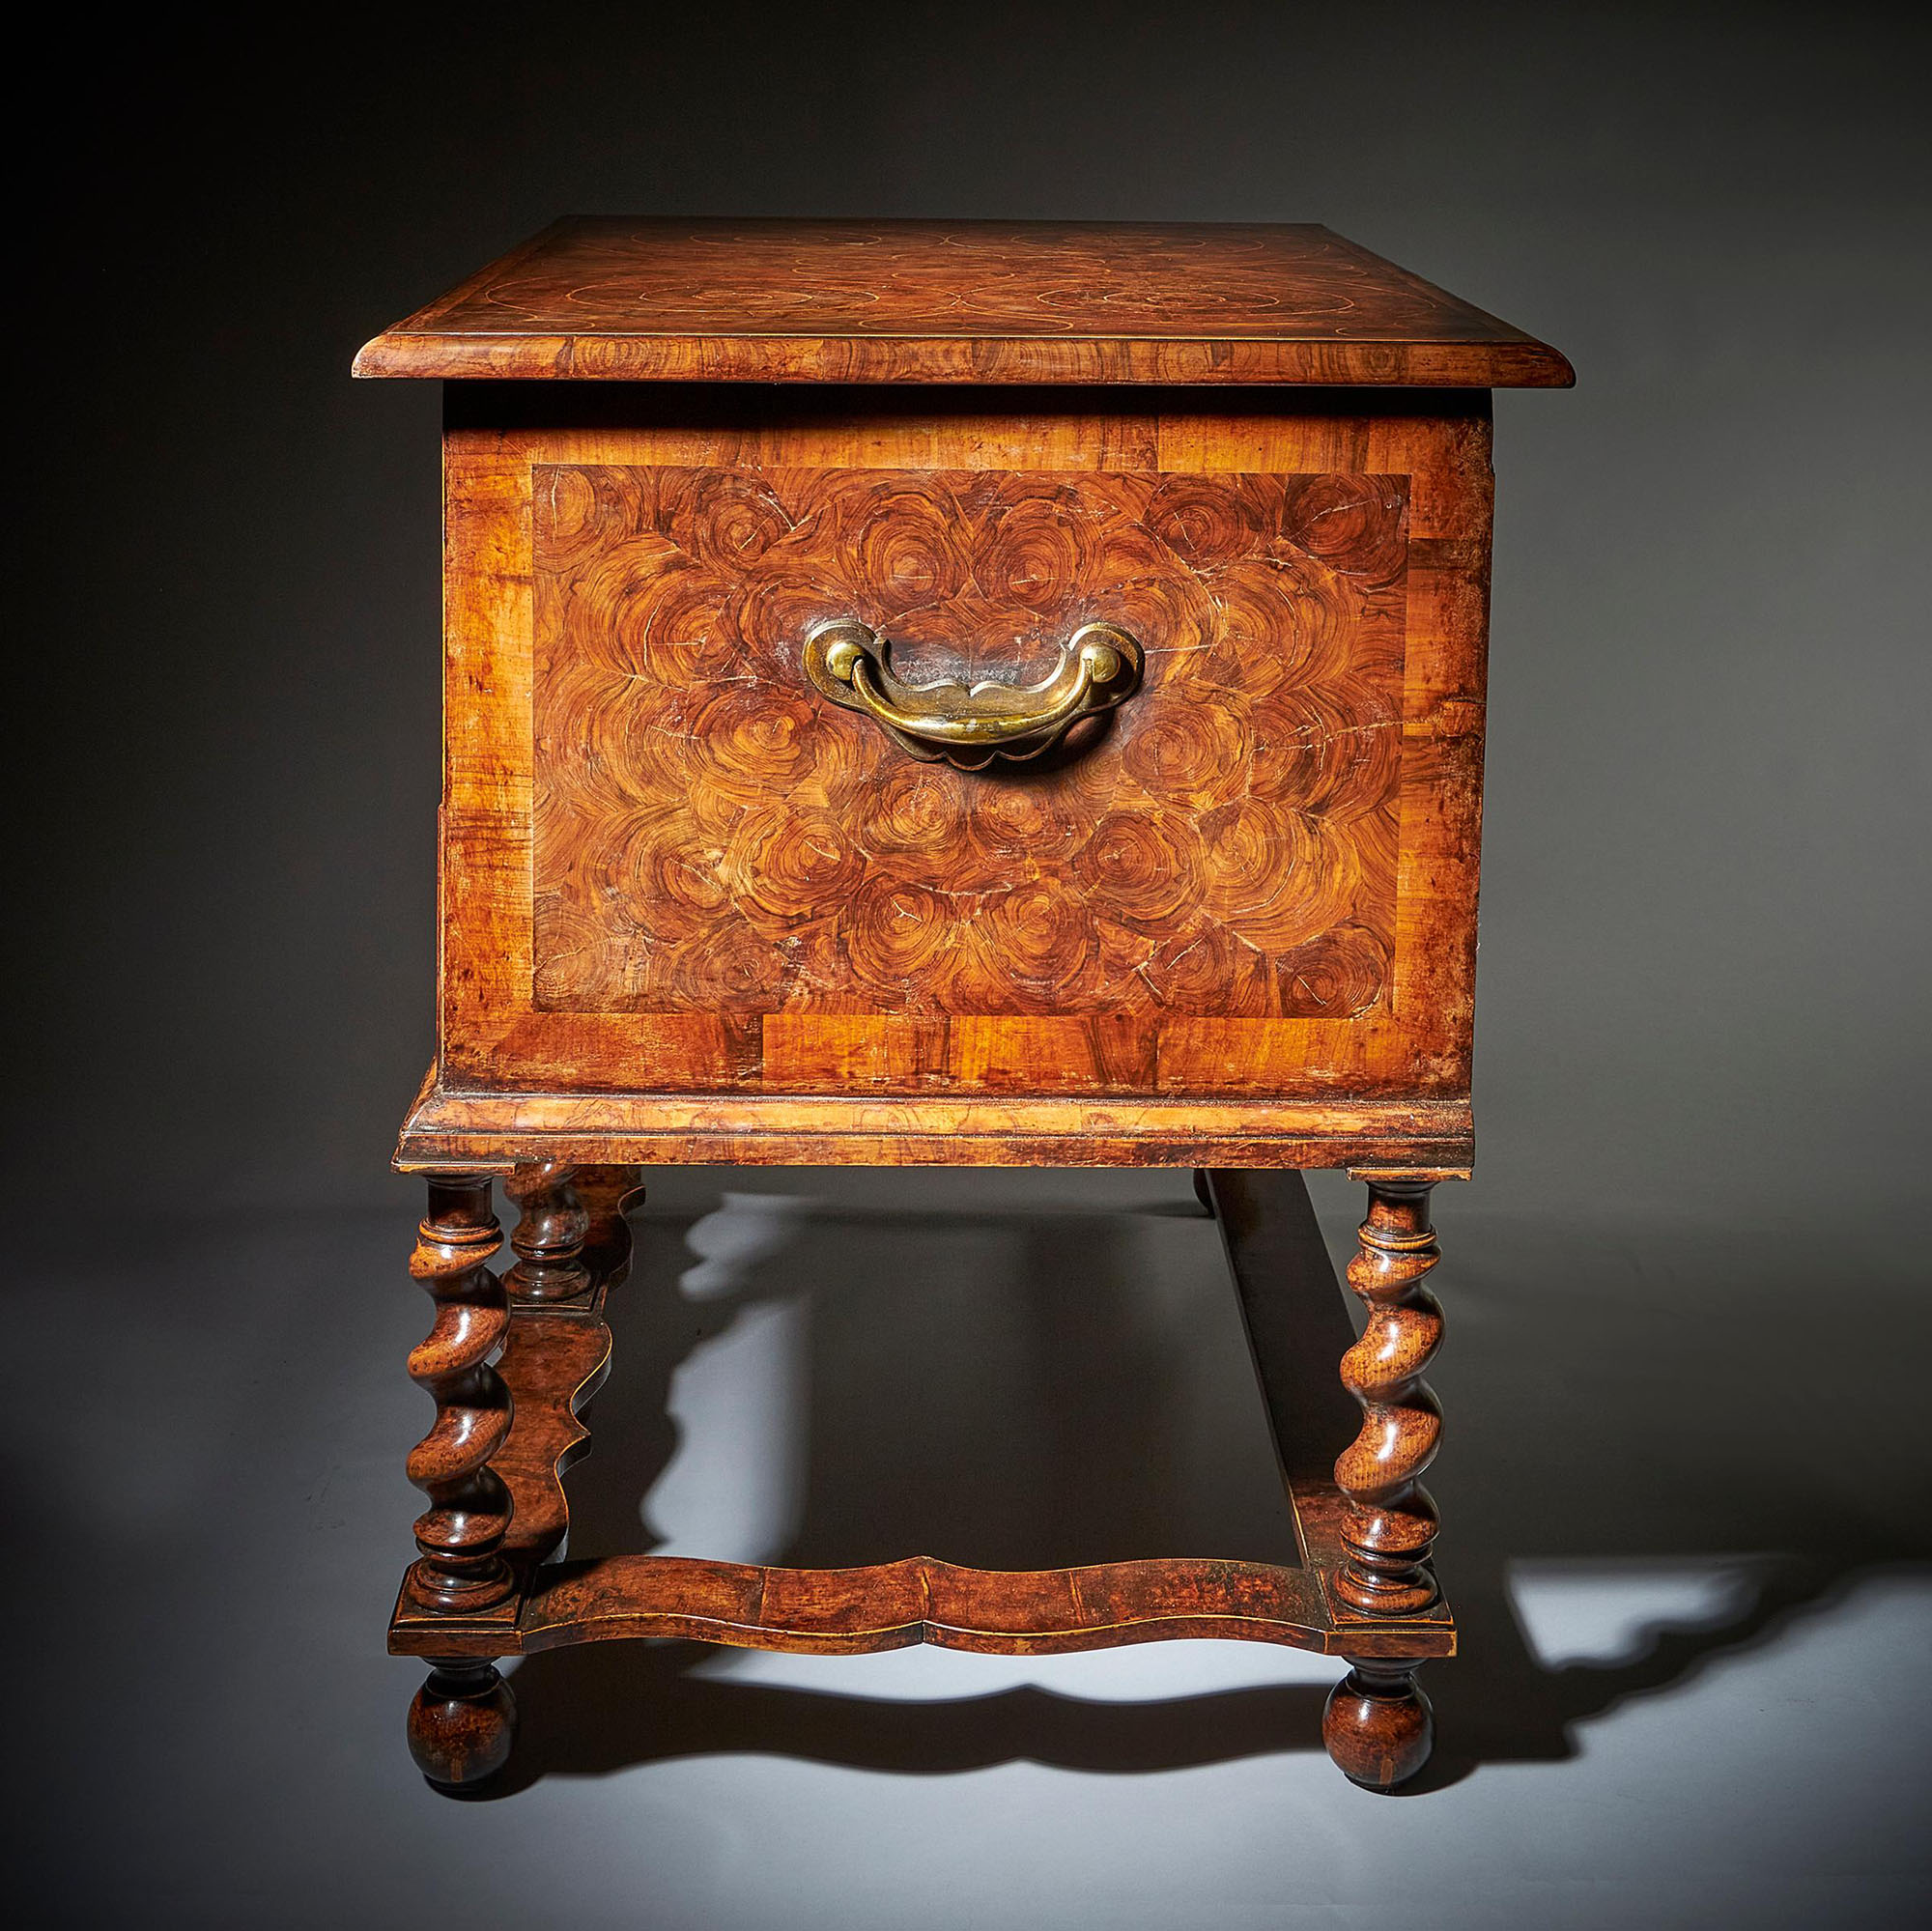 A fine and extremely rare 17th century William and Mary baroque olive oyster chest on stand or 'table box', circa 1675-1690. 17